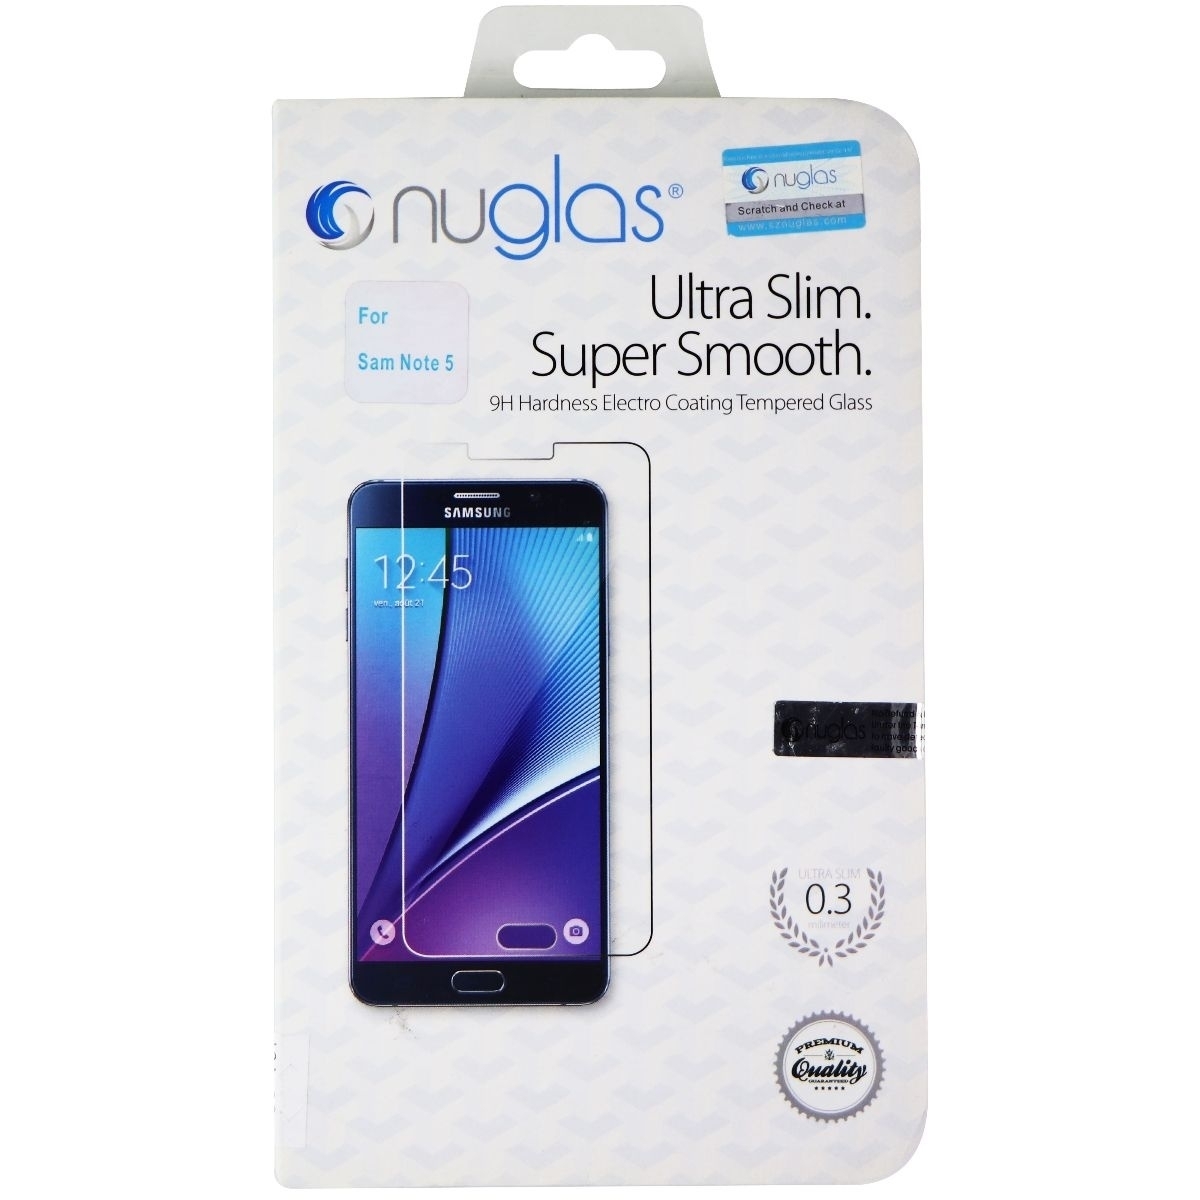 NuGlas Ultra Slim Tempered Glass For Samsung Galaxy Note5 - Clear